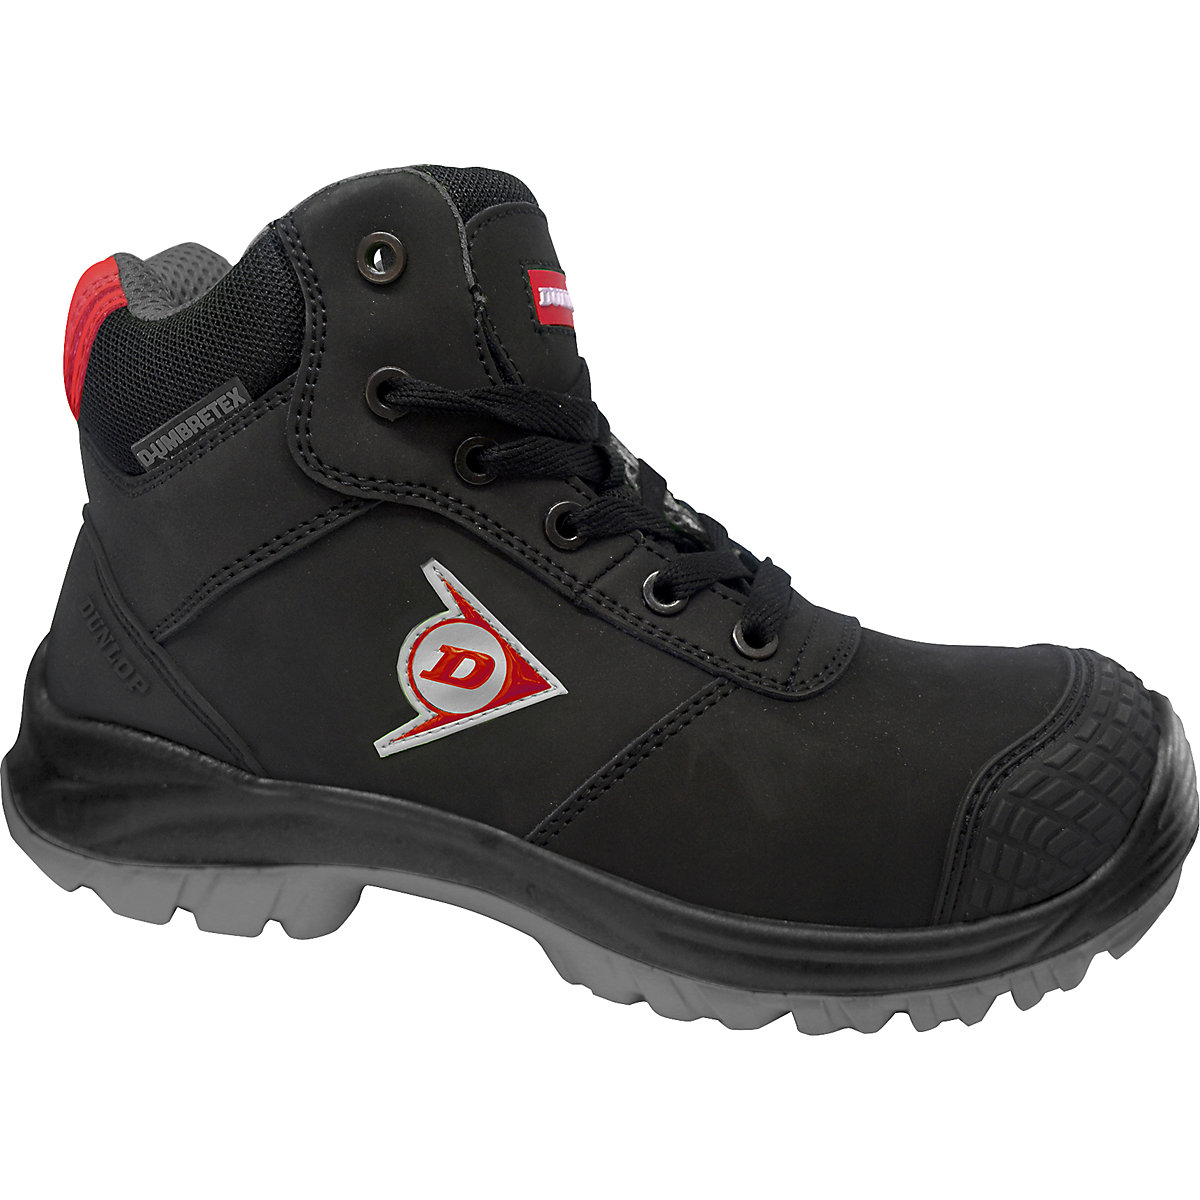 FIRST ONE ADV TITAN S3 safety lace-up boot - DUNLOP